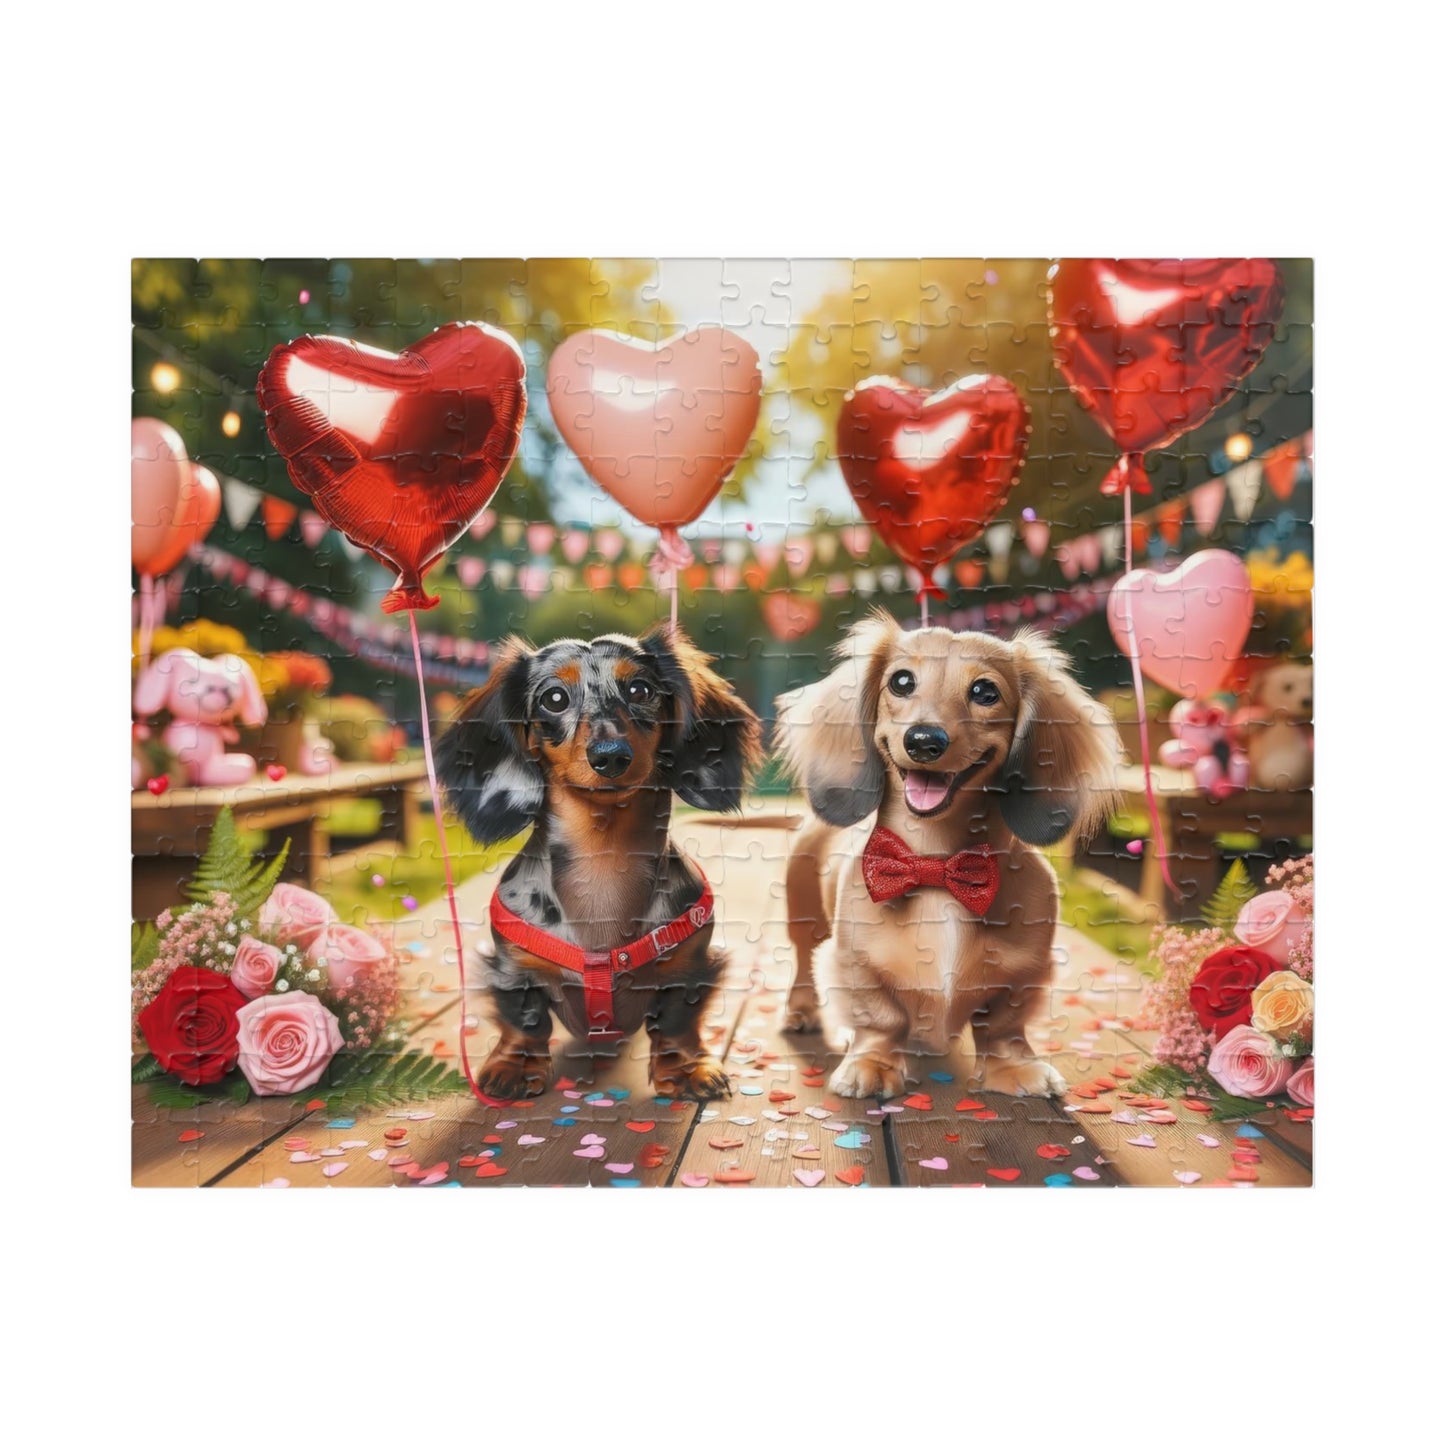 Charming Puppy Love Celebration Miniature Dachshund Jigsaw Puzzle - Dapple and English Cream Lovers Gift 110, 252, 520 or 1014 Pieces